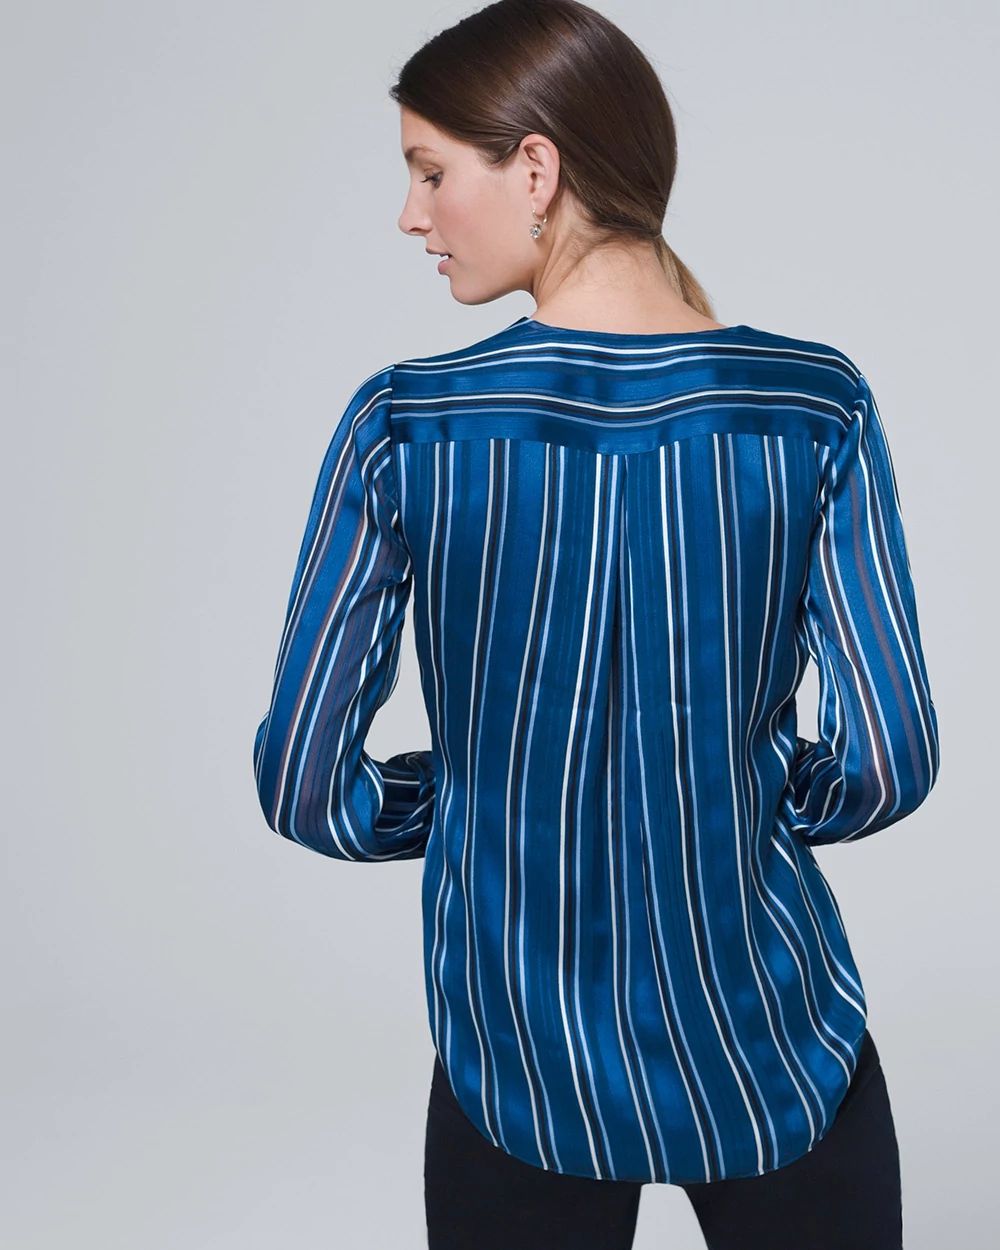 Stripe Surplice Blouse click to view larger image.